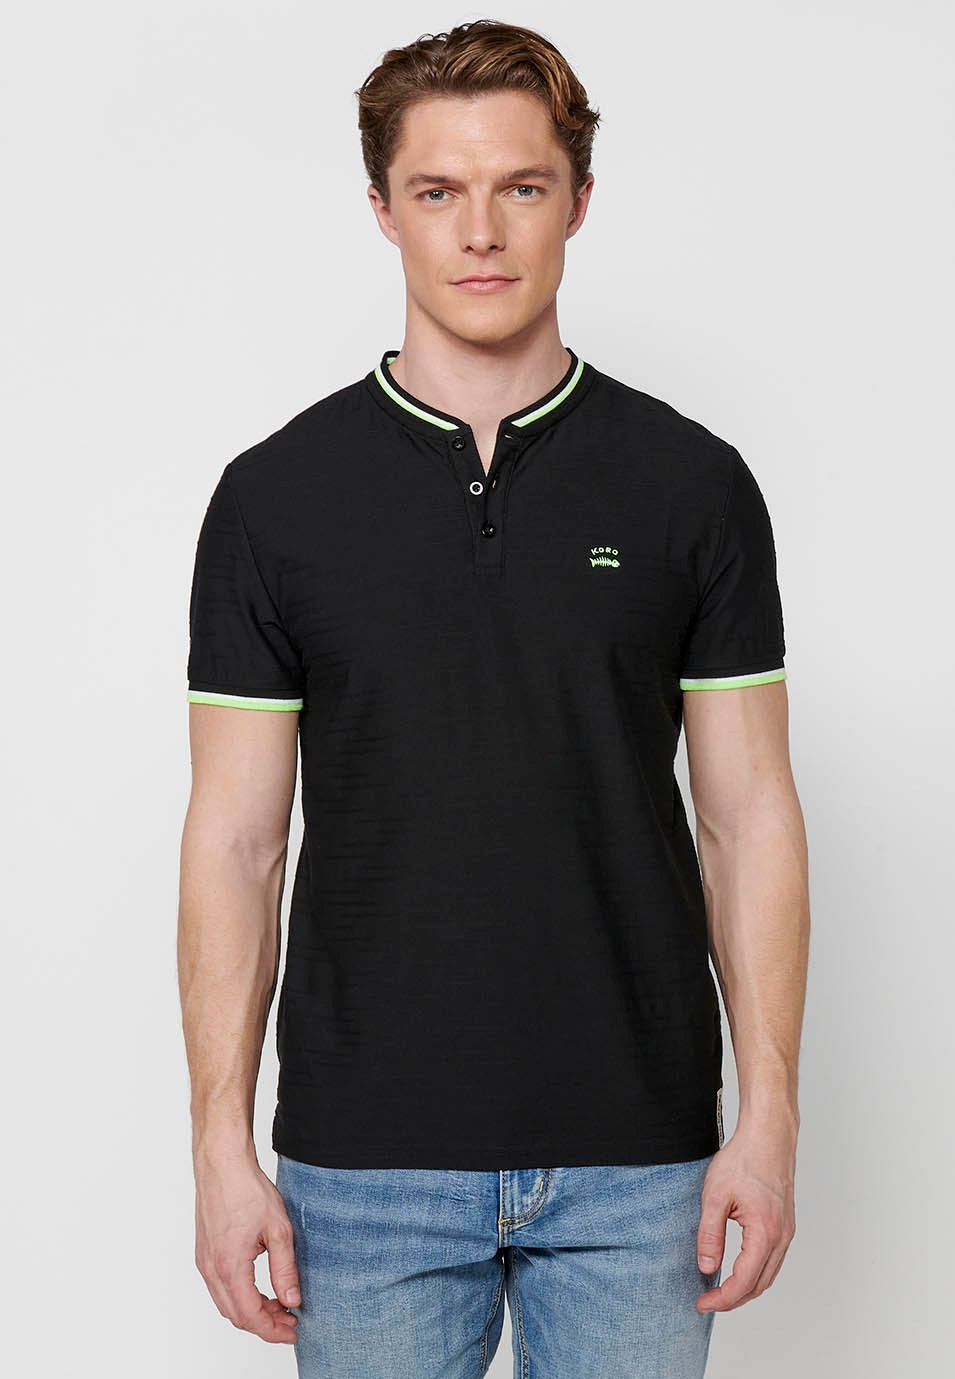 Short-sleeved Polo Shirt with Round Neck with buttoned opening and Finish with side slits in Black for Men 4